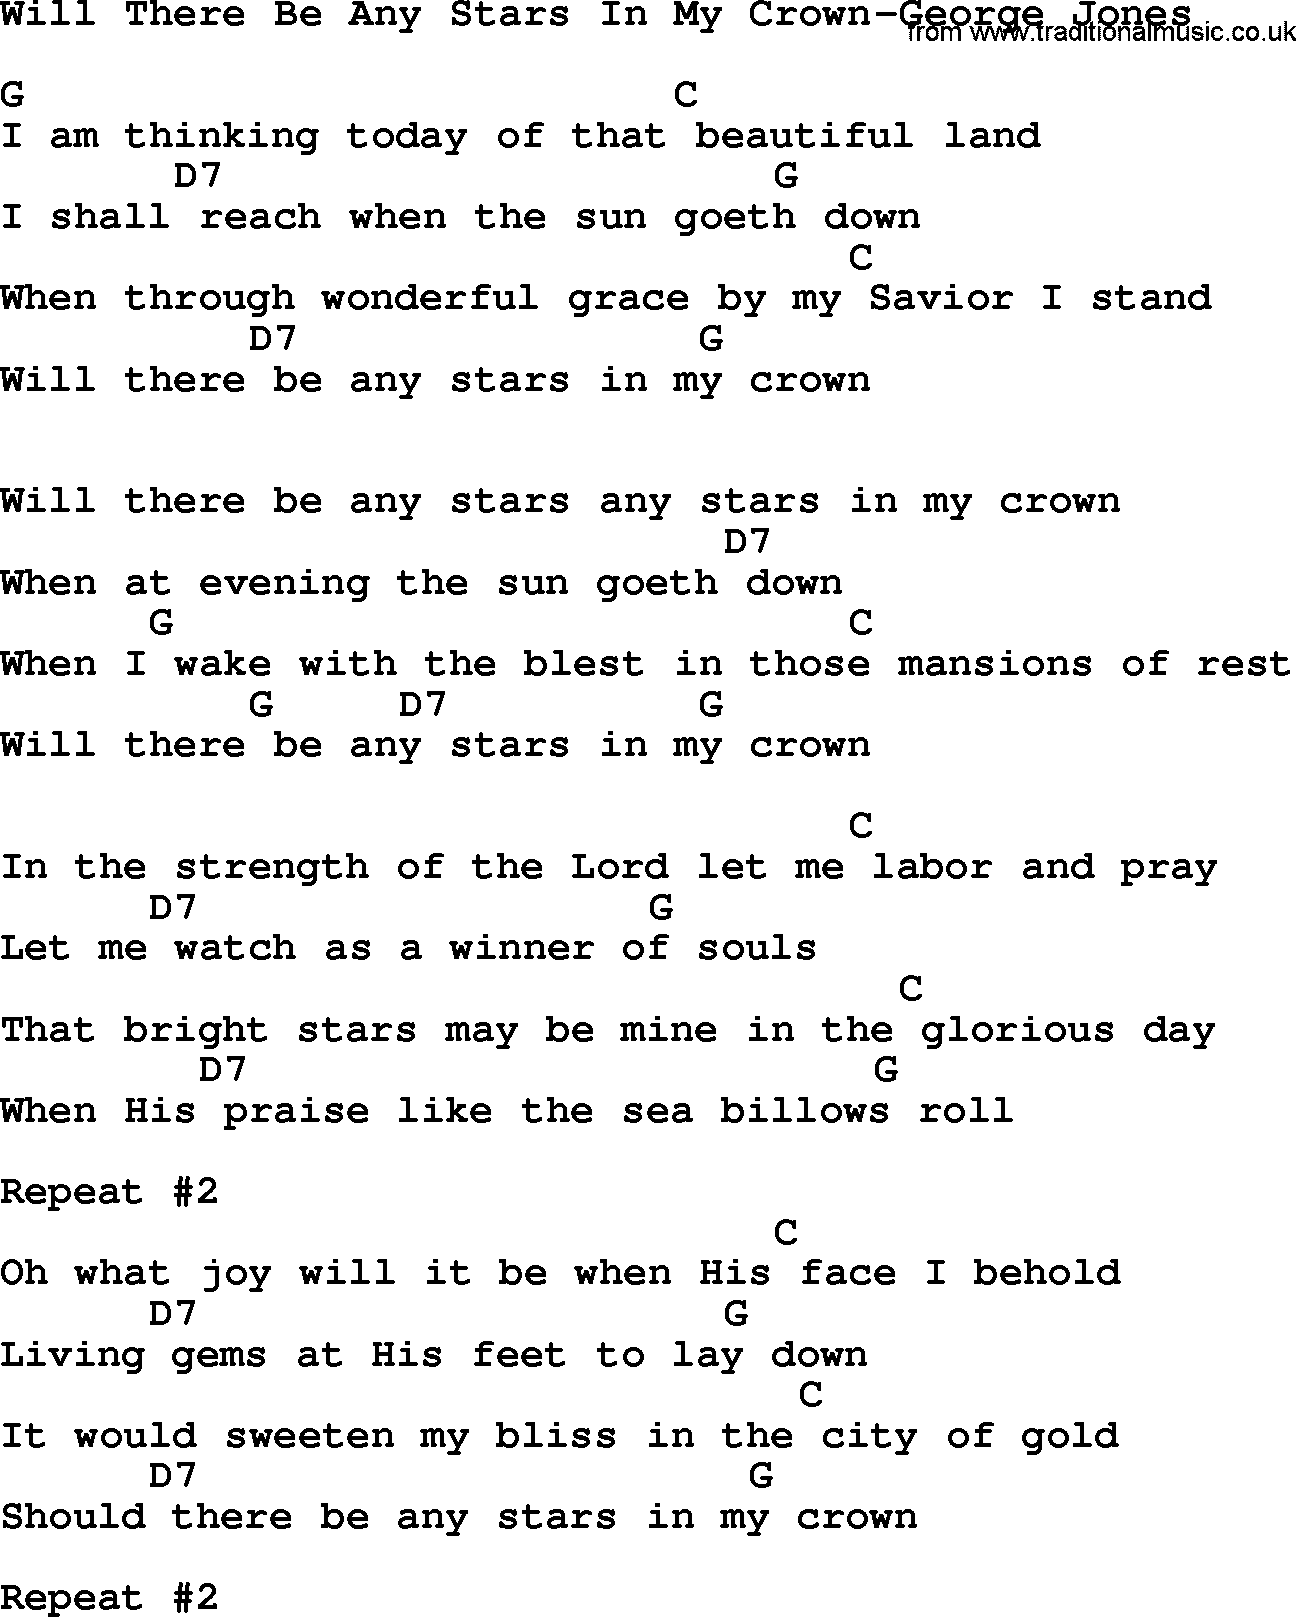 Country music song: Will There Be Any Stars In My Crown-George Jones lyrics and chords